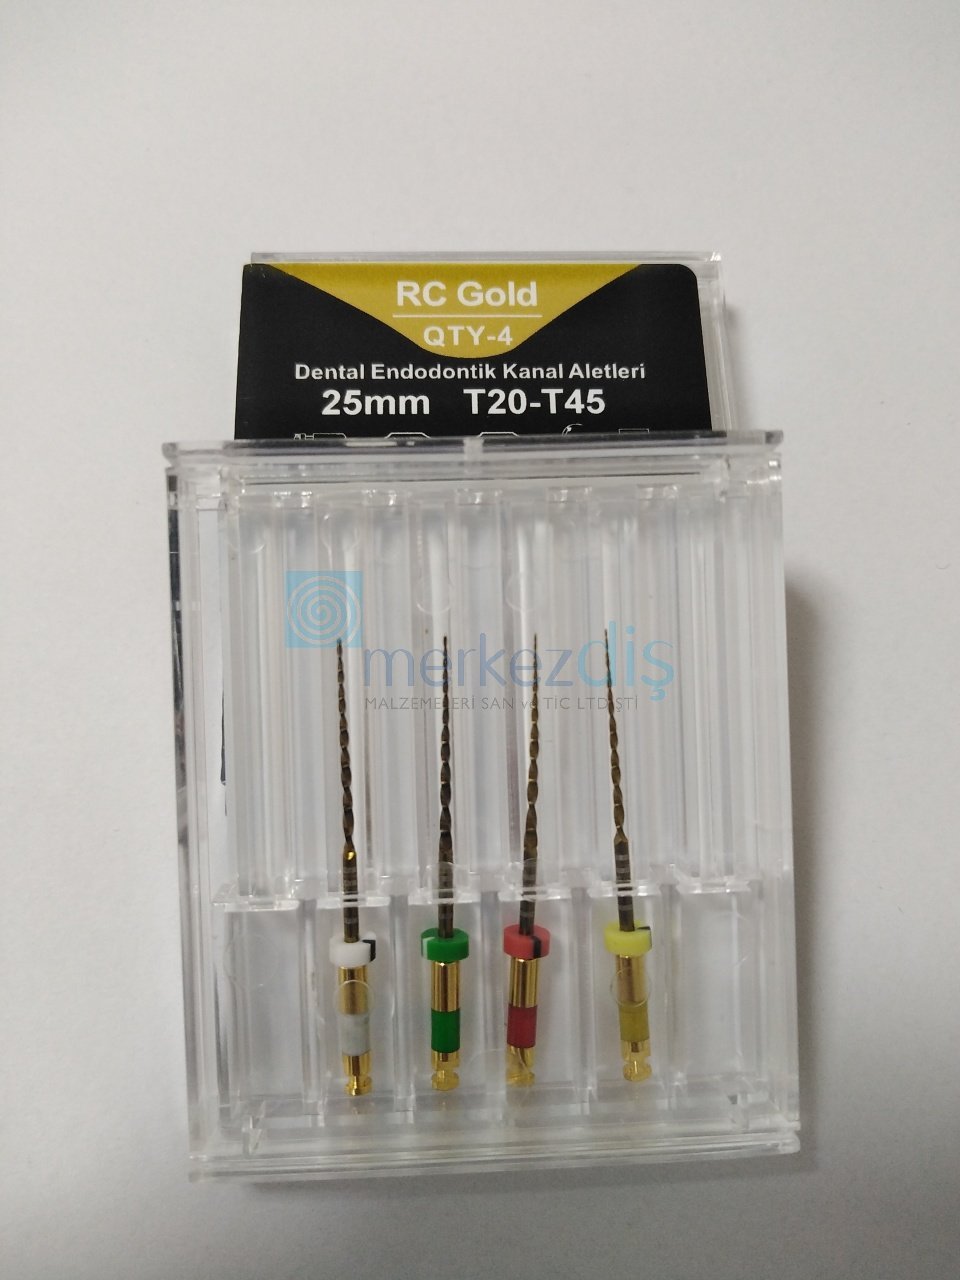 Perfect RC Gold Resiprocal Eğe 4 lü 25 mm